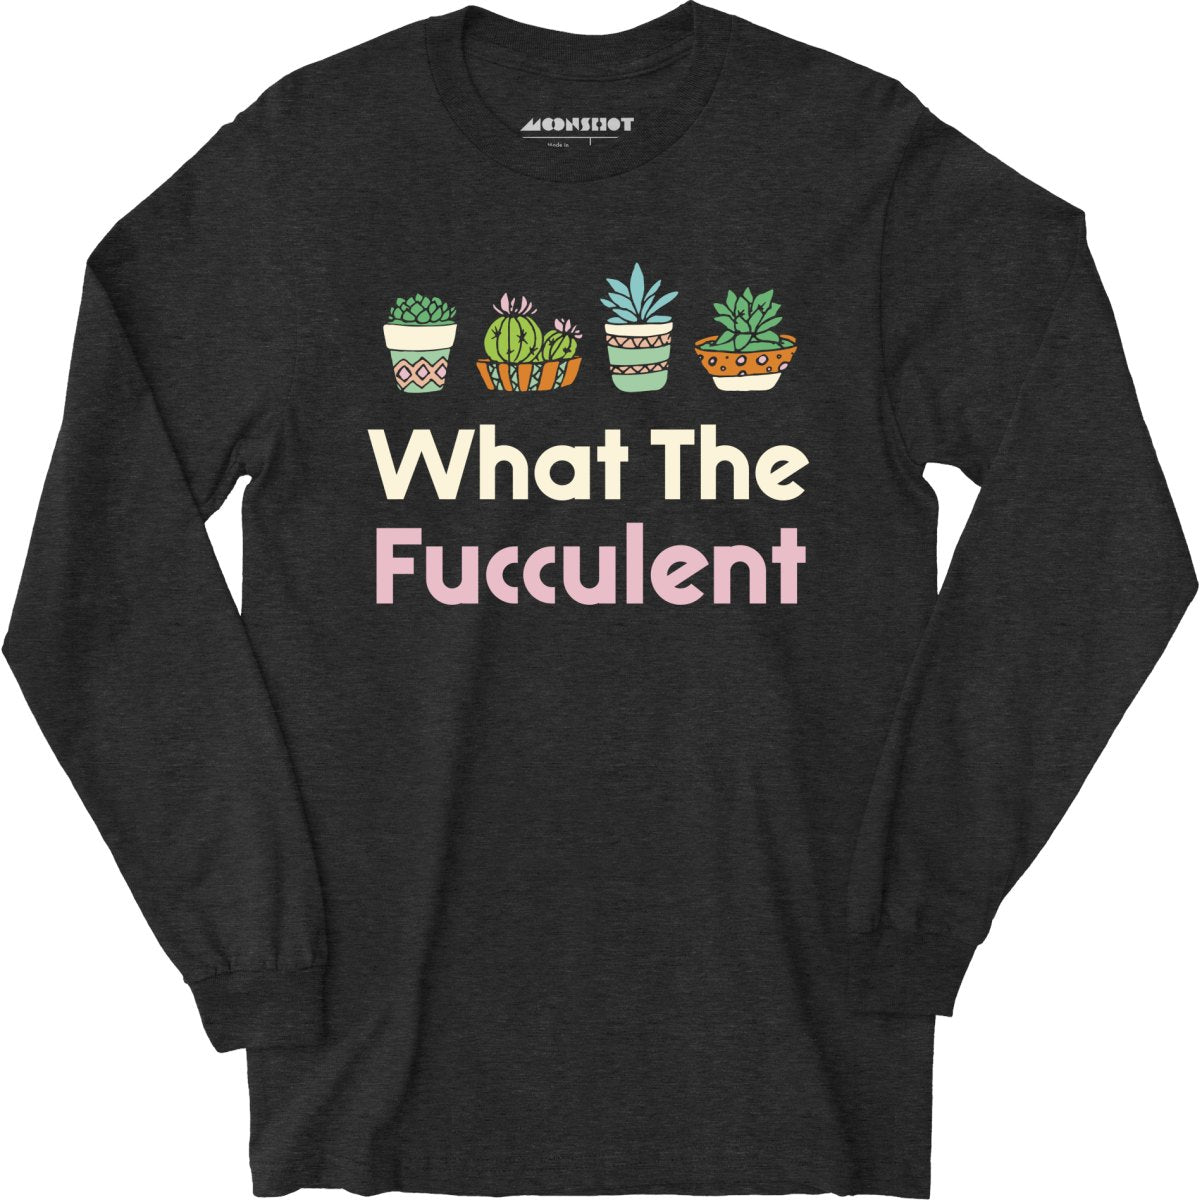 What The Fucculent - Long Sleeve T-Shirt